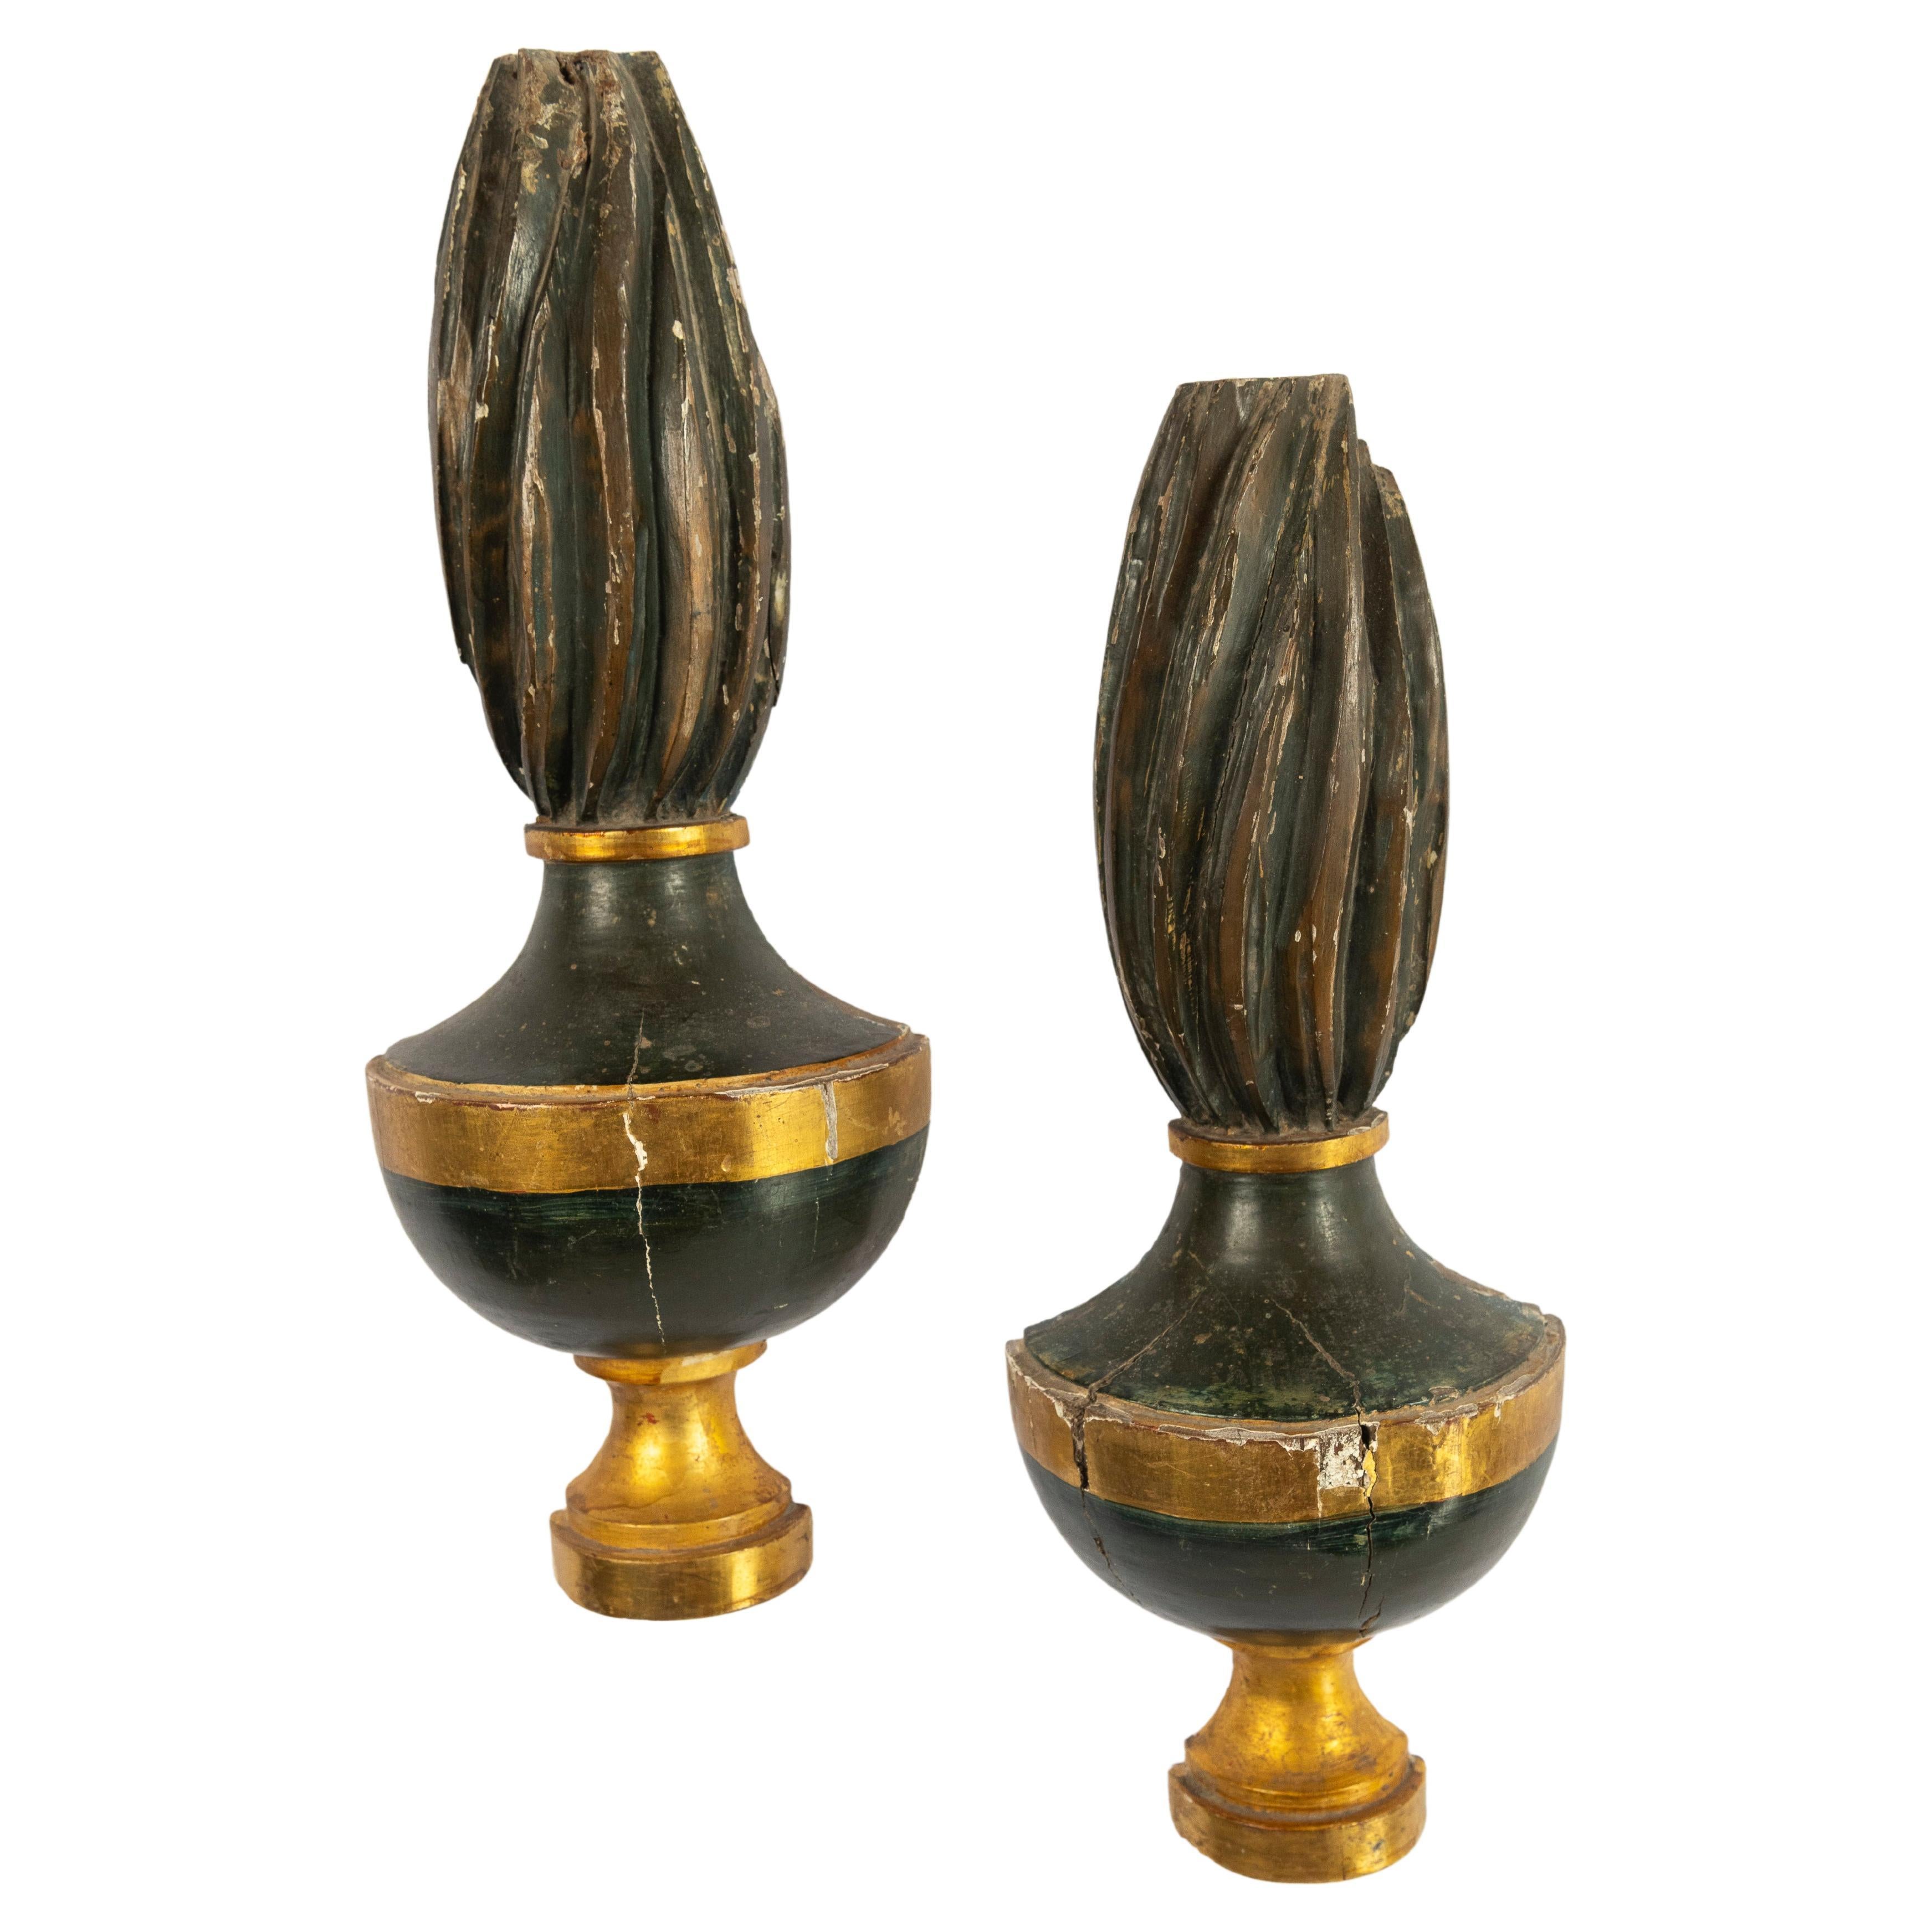 Vintage Carved and Gilded Wooden Flame Wall Ornaments For Sale